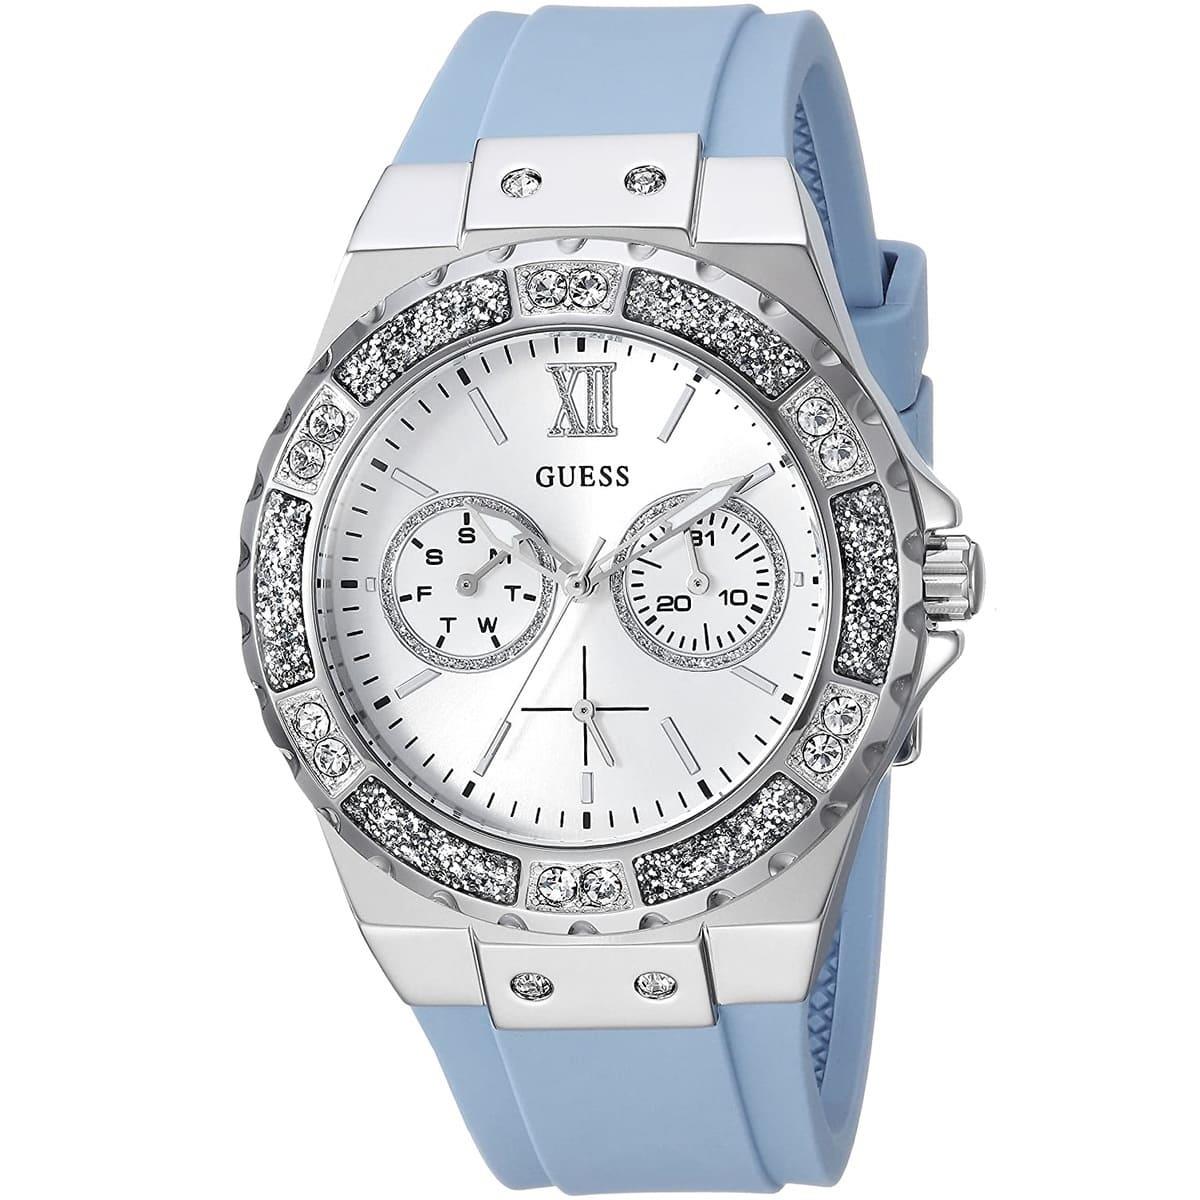 ĐỒNG HỒ ĐEO TAY NỮ GUESS BLUE SILICON LIMELIGHT WOMEN WATCH W1053L5 6